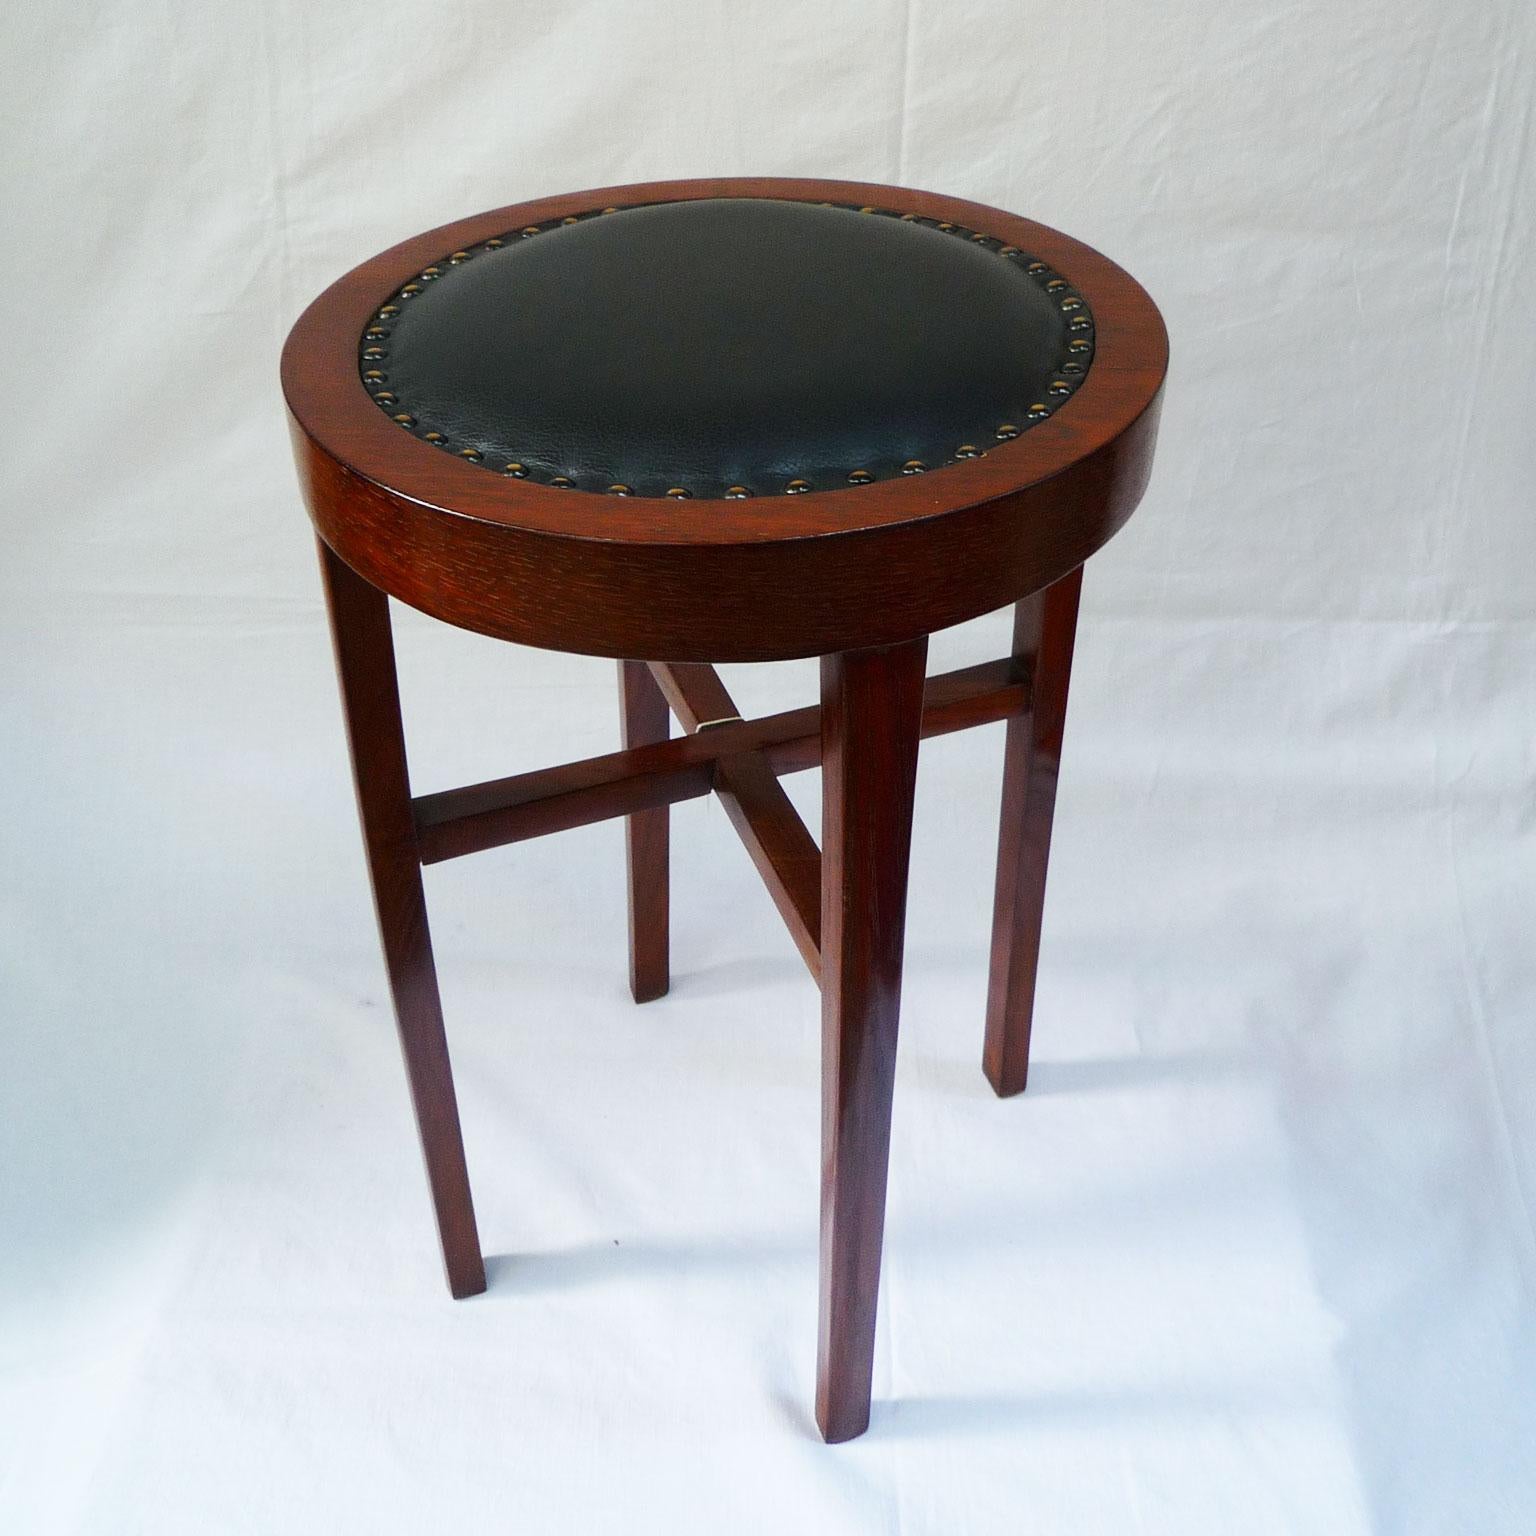 German Classicist Stool with Leather Upholstery